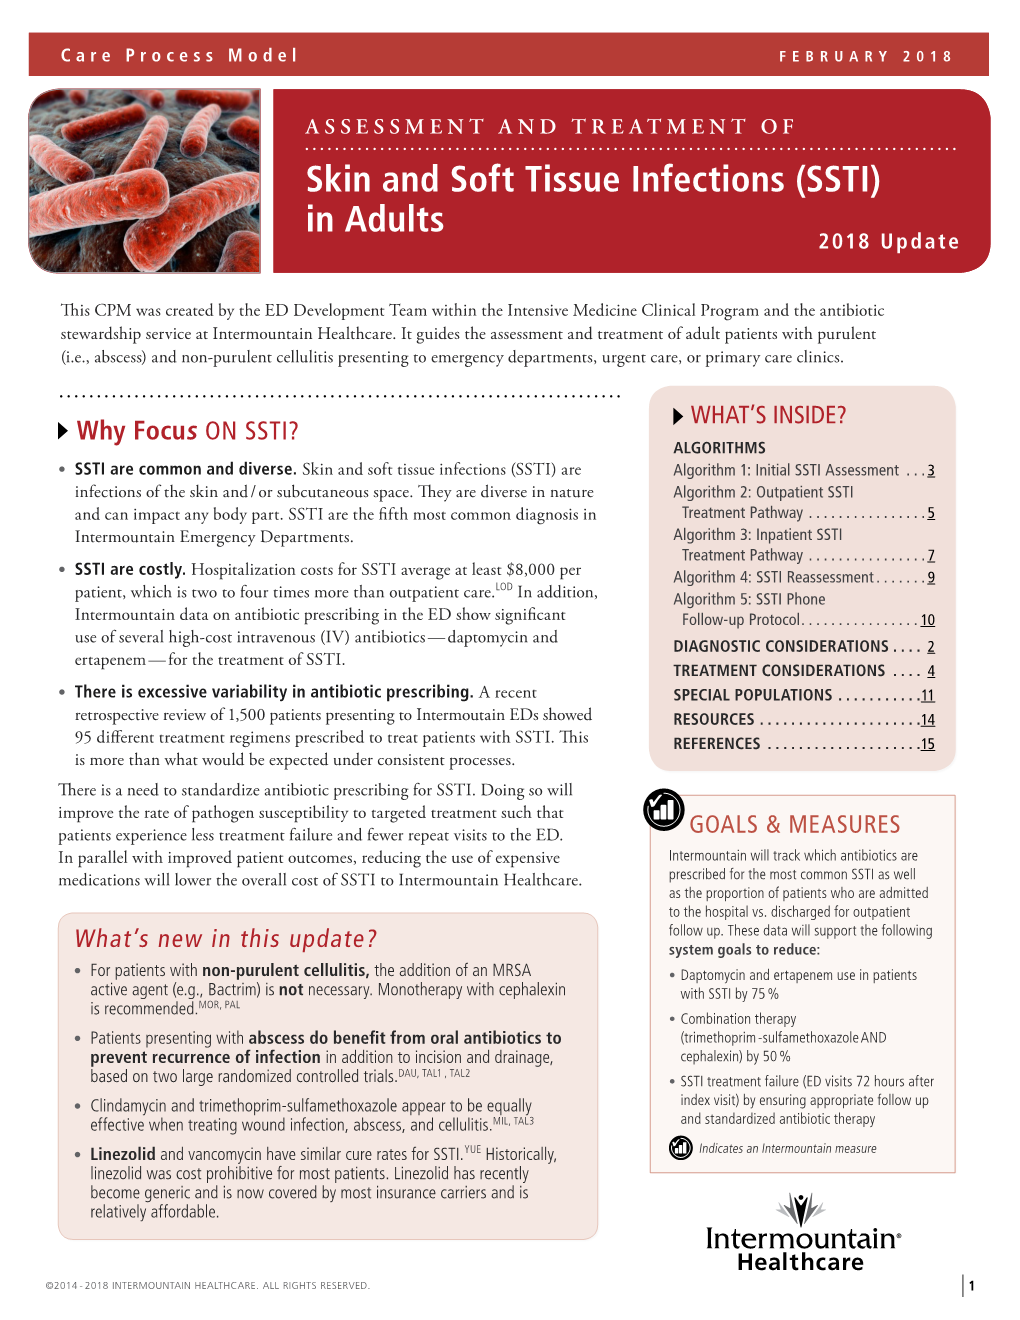 Care Process Models Skin and Soft Tissue Infections (SSTI) in Adults